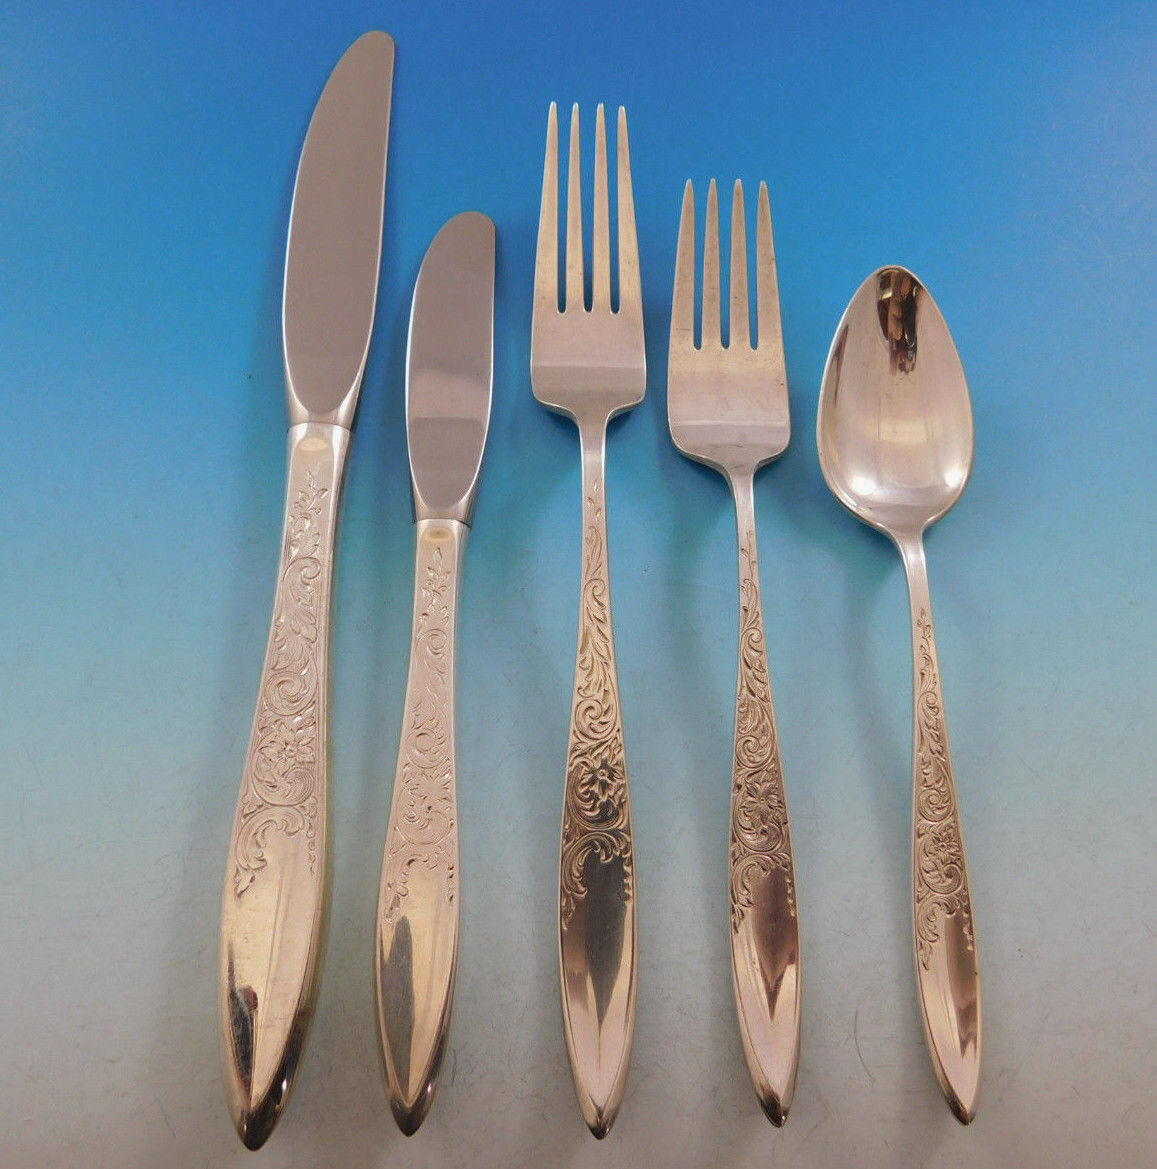 Primary image for White Paisley by Gorham Sterling Silver Flatware Service for 8 Set 45 pieces 